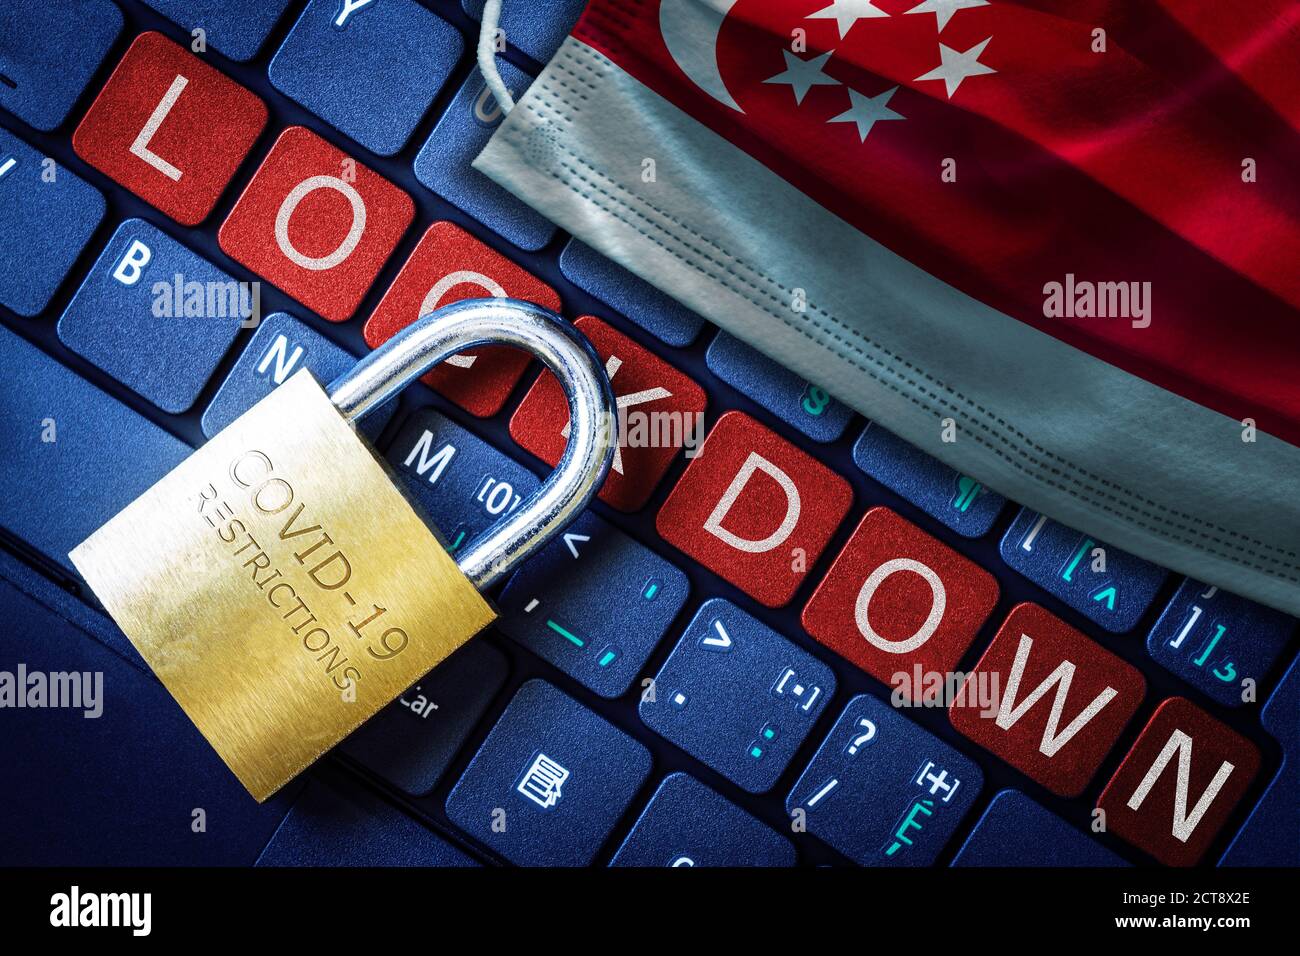 Singapore COVID-19 coronavirus lockdown restrictions concept illustrated by padlock on laptop red alert keyboard buttons and face mask with Singaporea Stock Photo